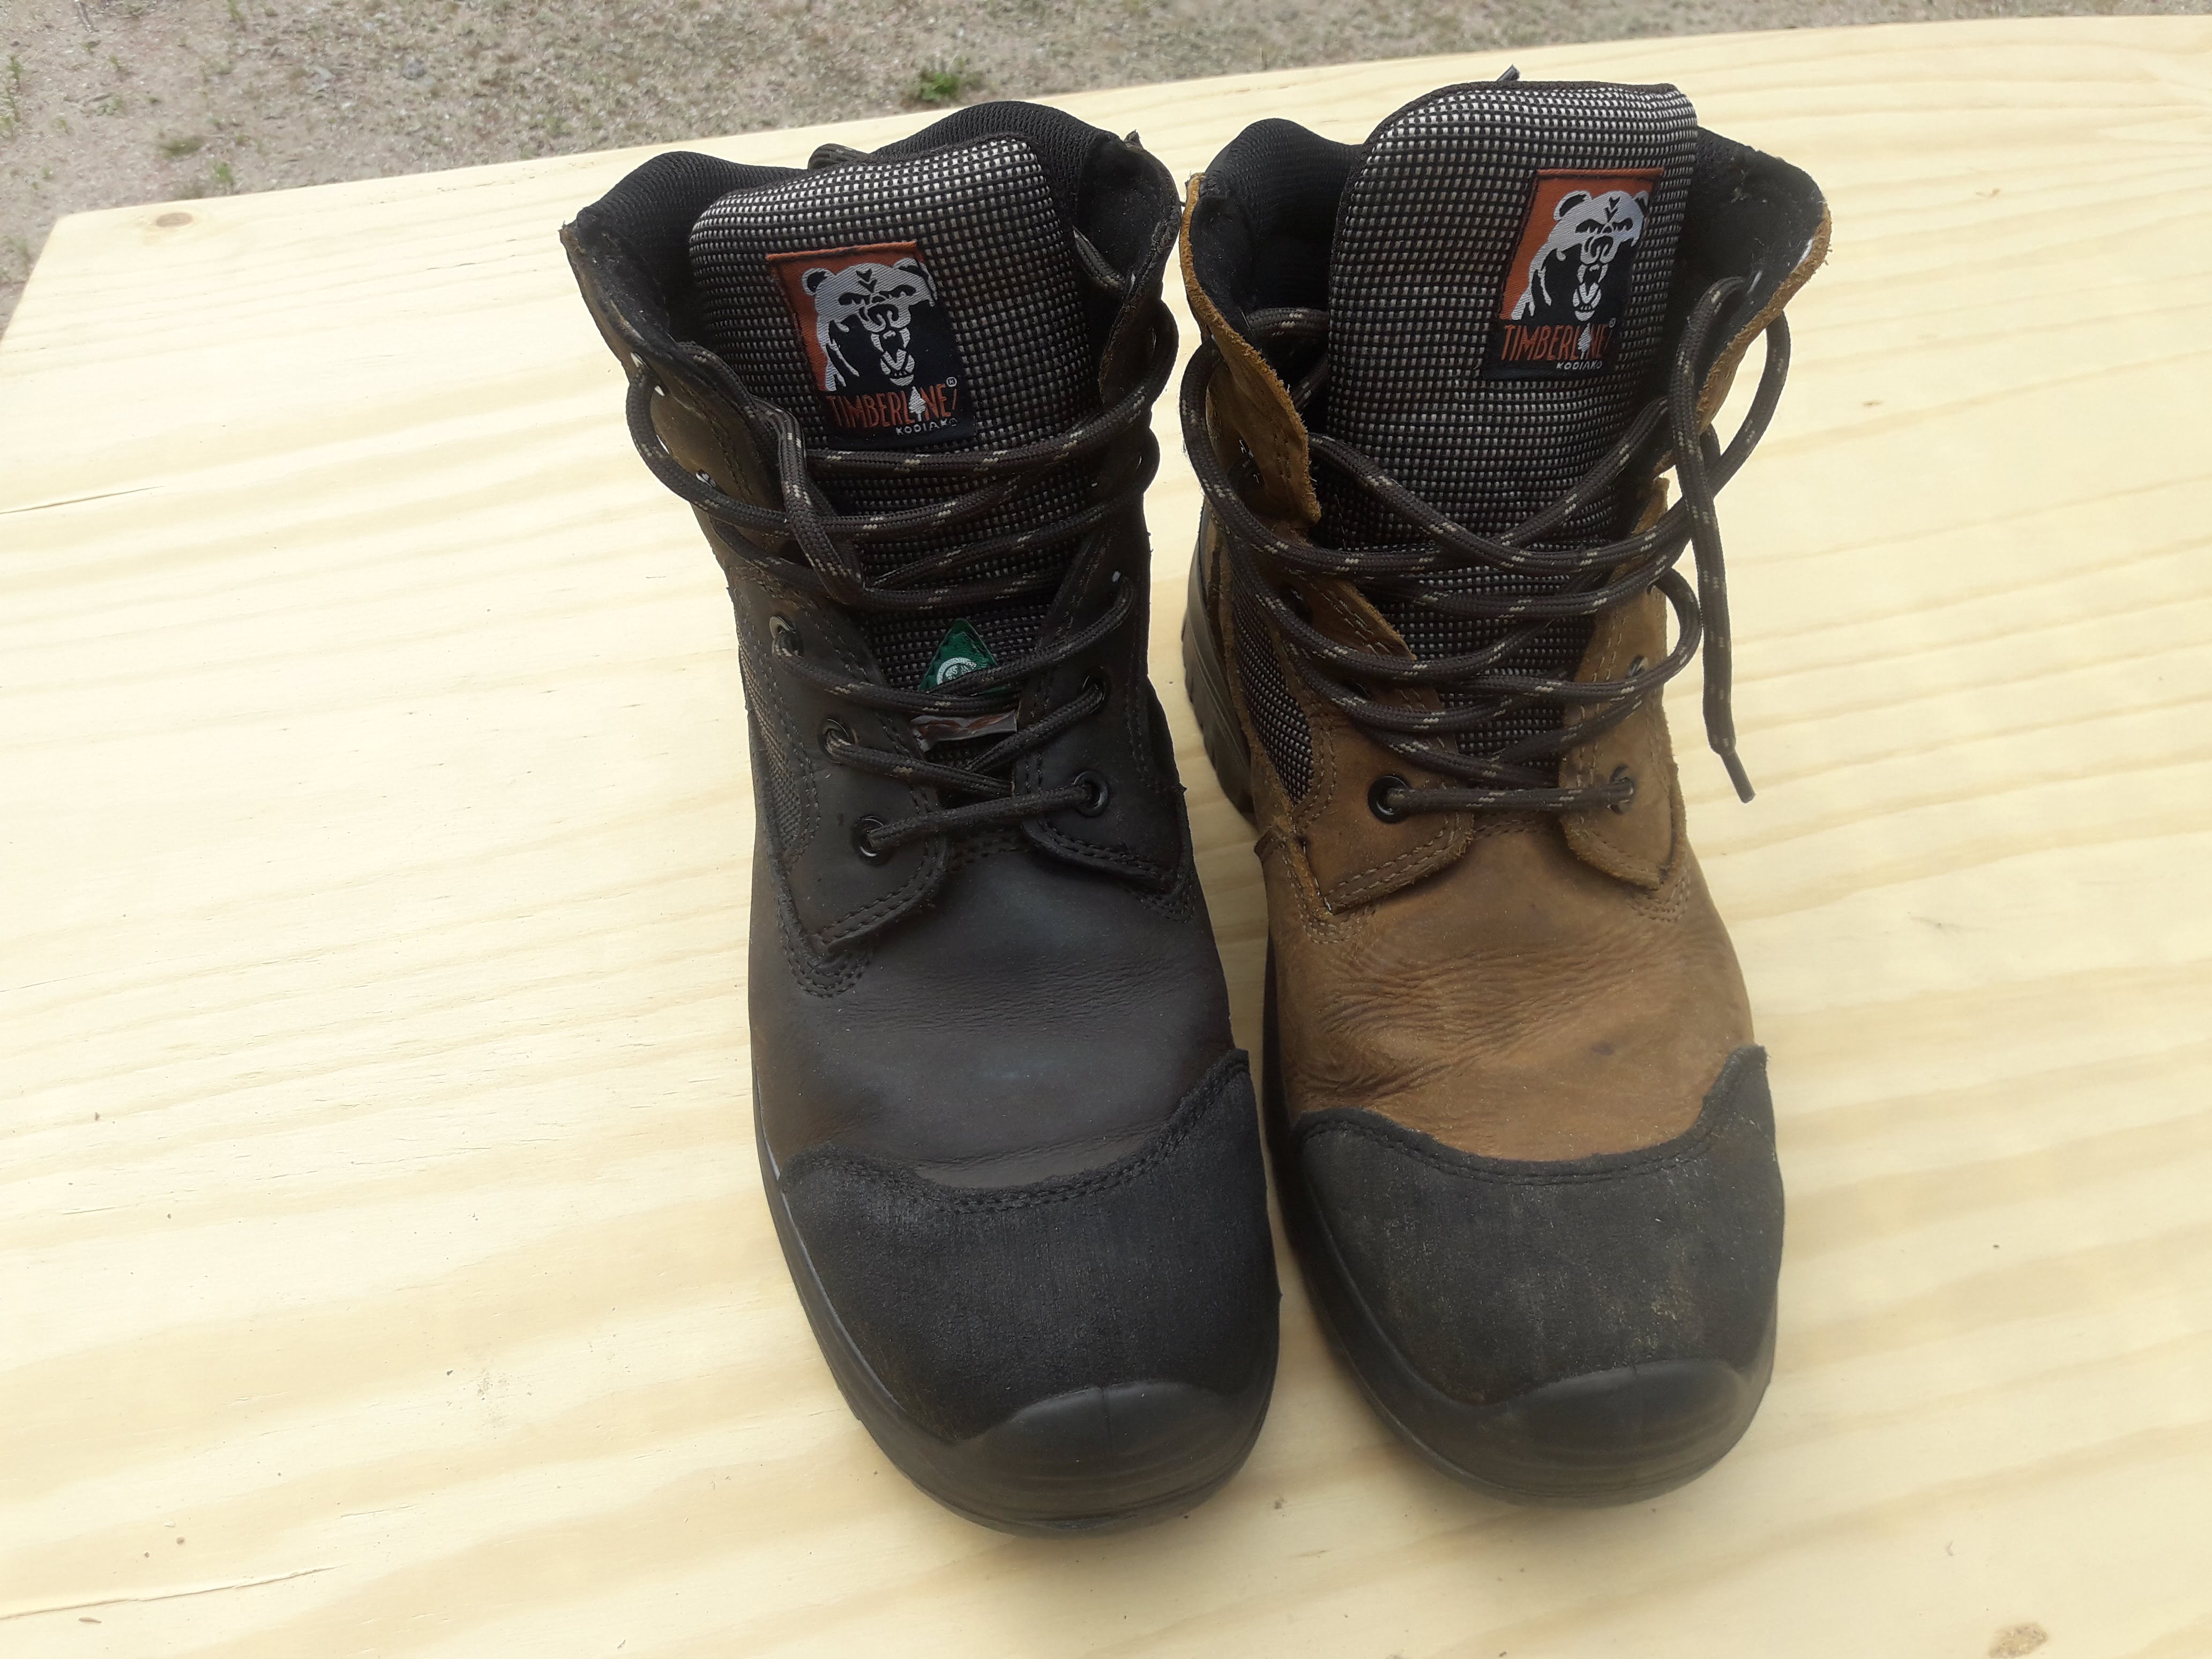 Before and after treating boot with Birch tar